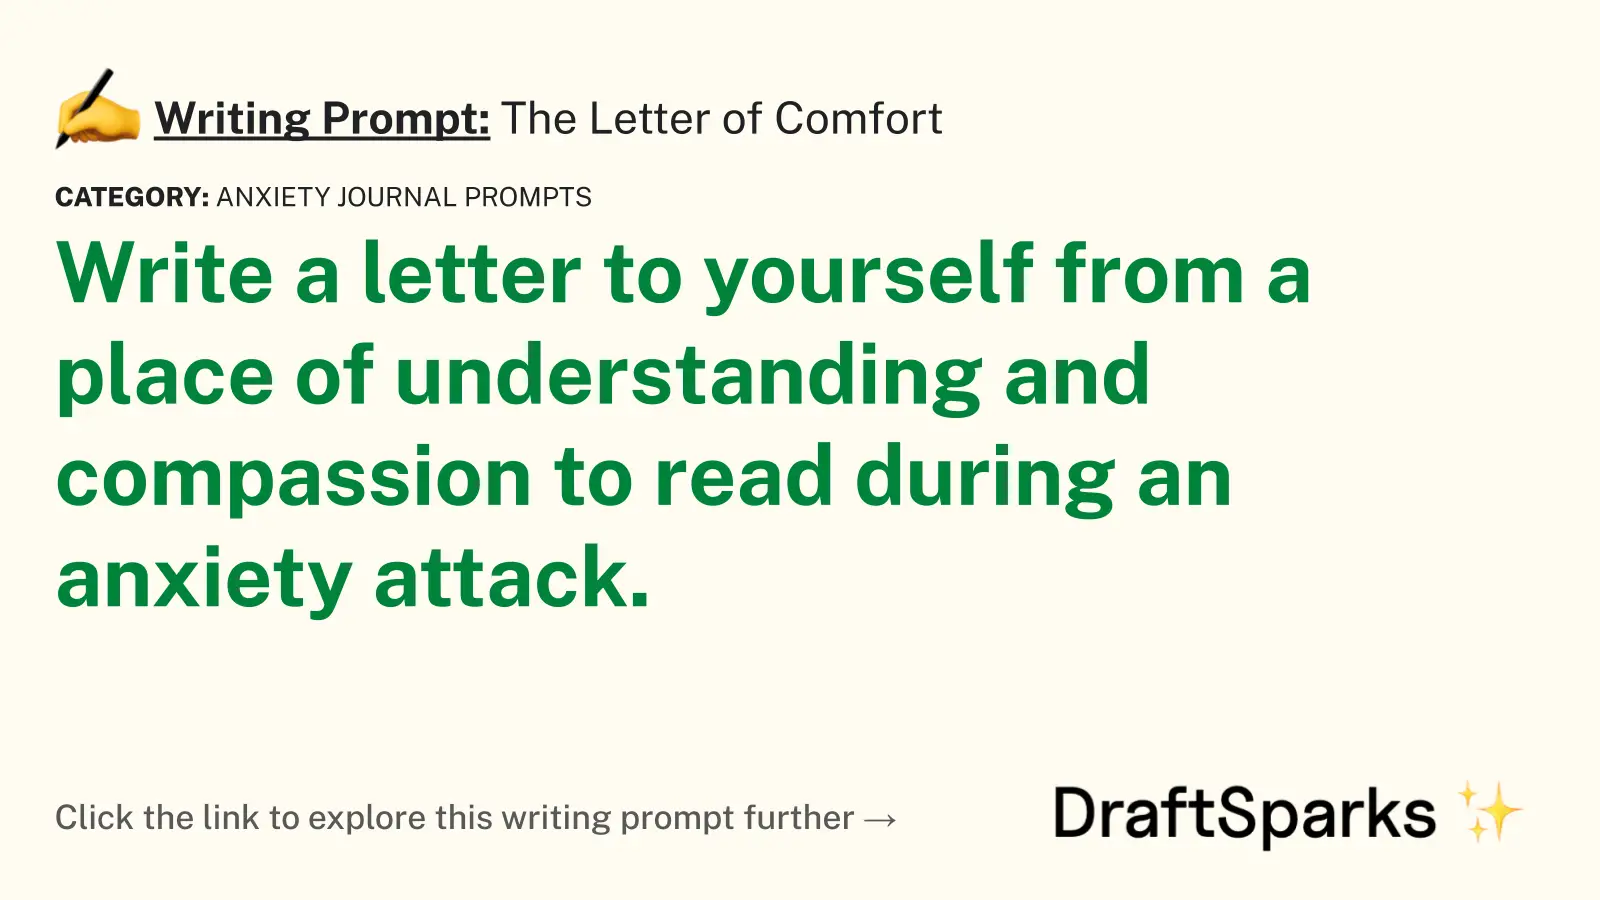 The Letter of Comfort